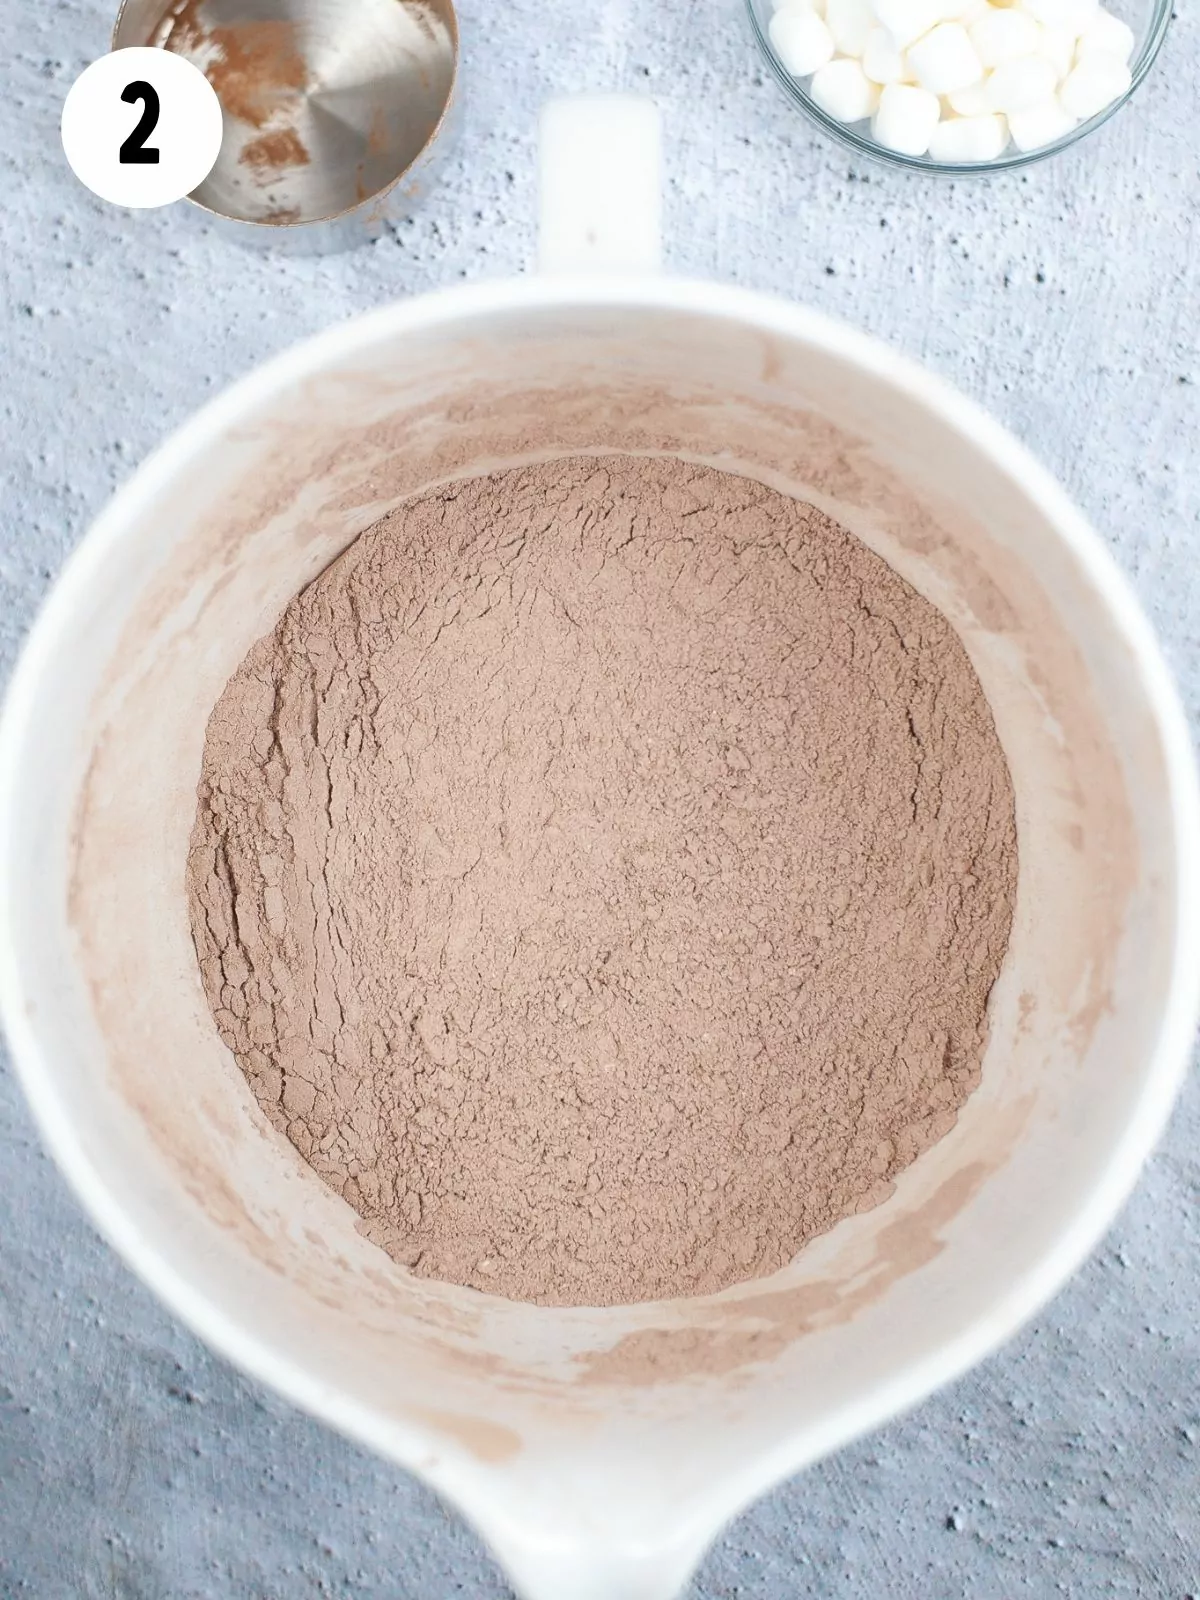 hot chocolate combined in bowl.